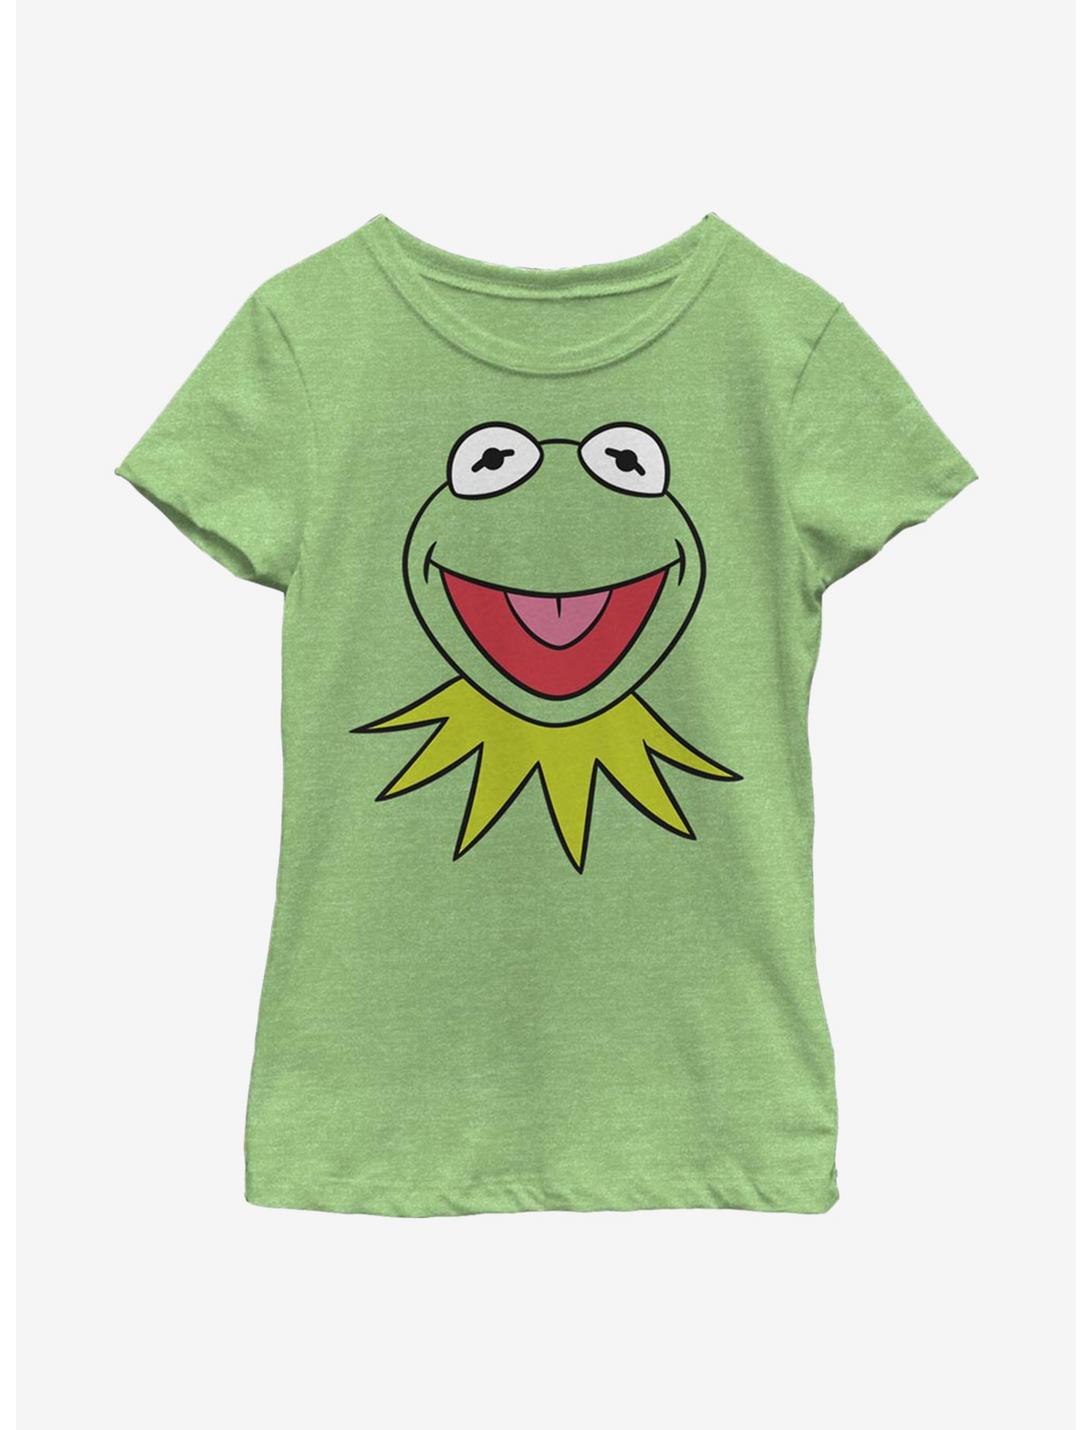 Disney The Muppets Kermit Big Face Youth Girls T-Shirt, GRN APPLE, hi-res